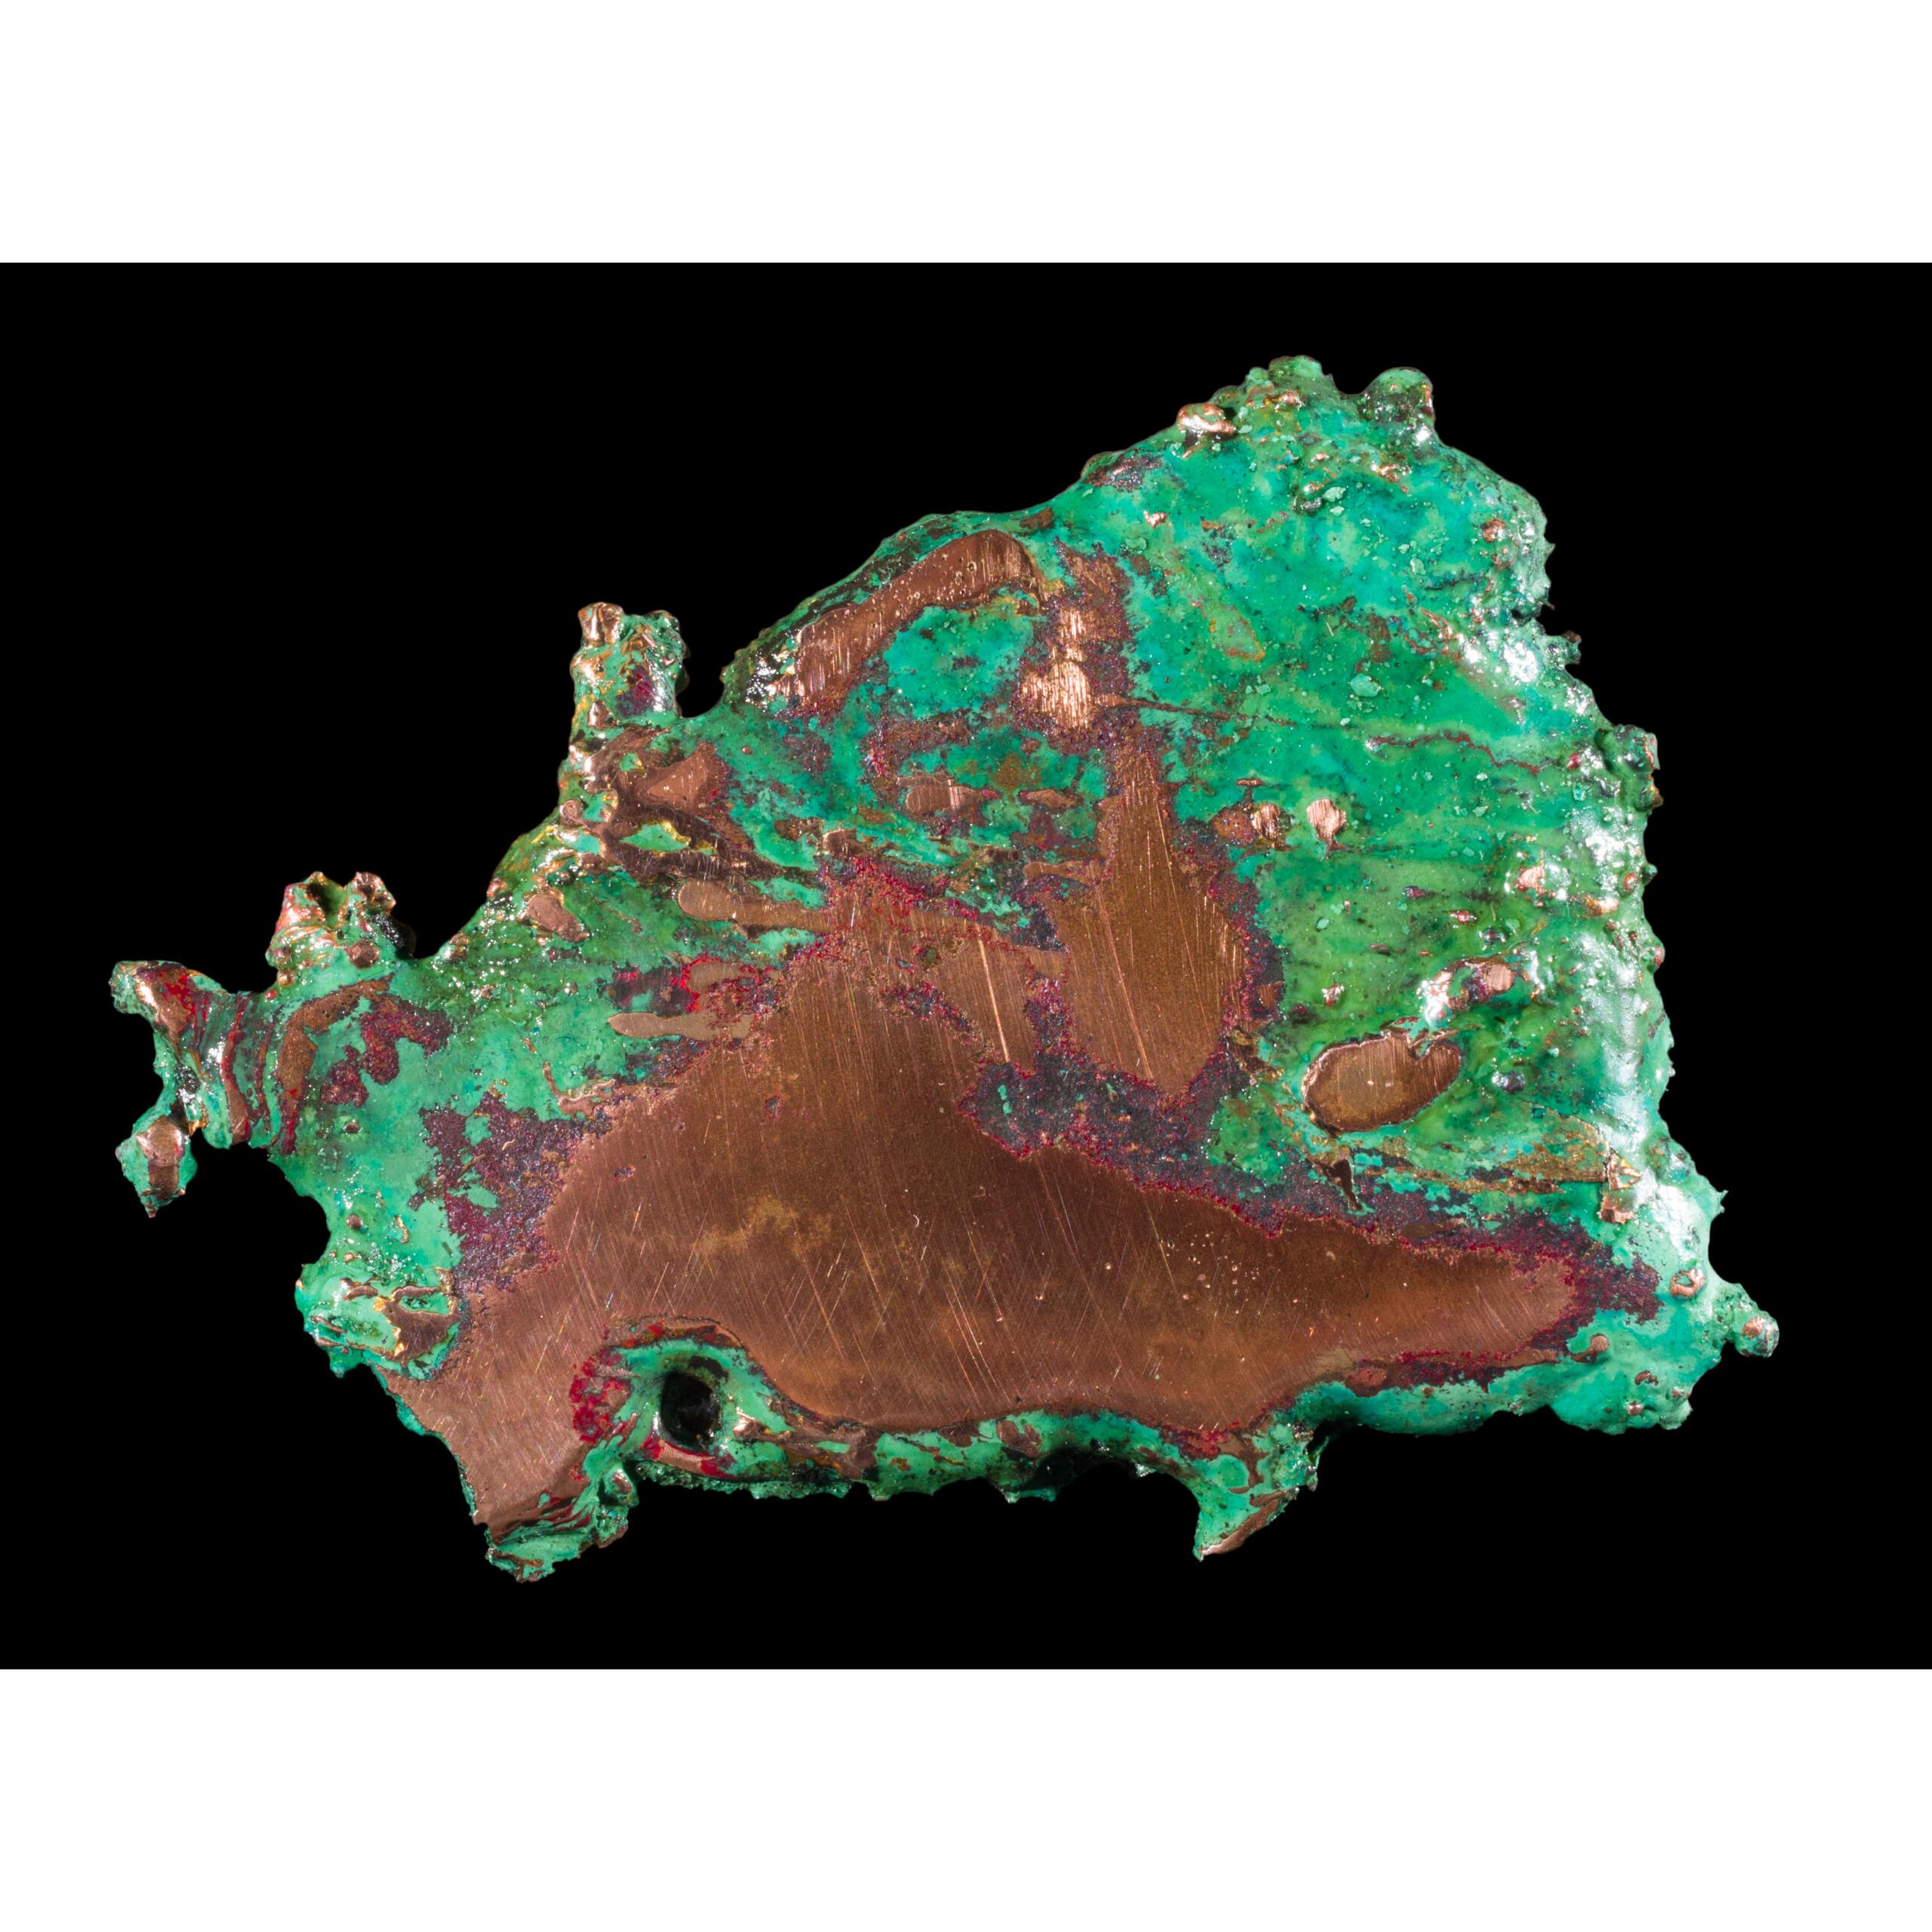 This is a picture of a piece of polished copper, possessing a large quantity of vibrant green oxidization.